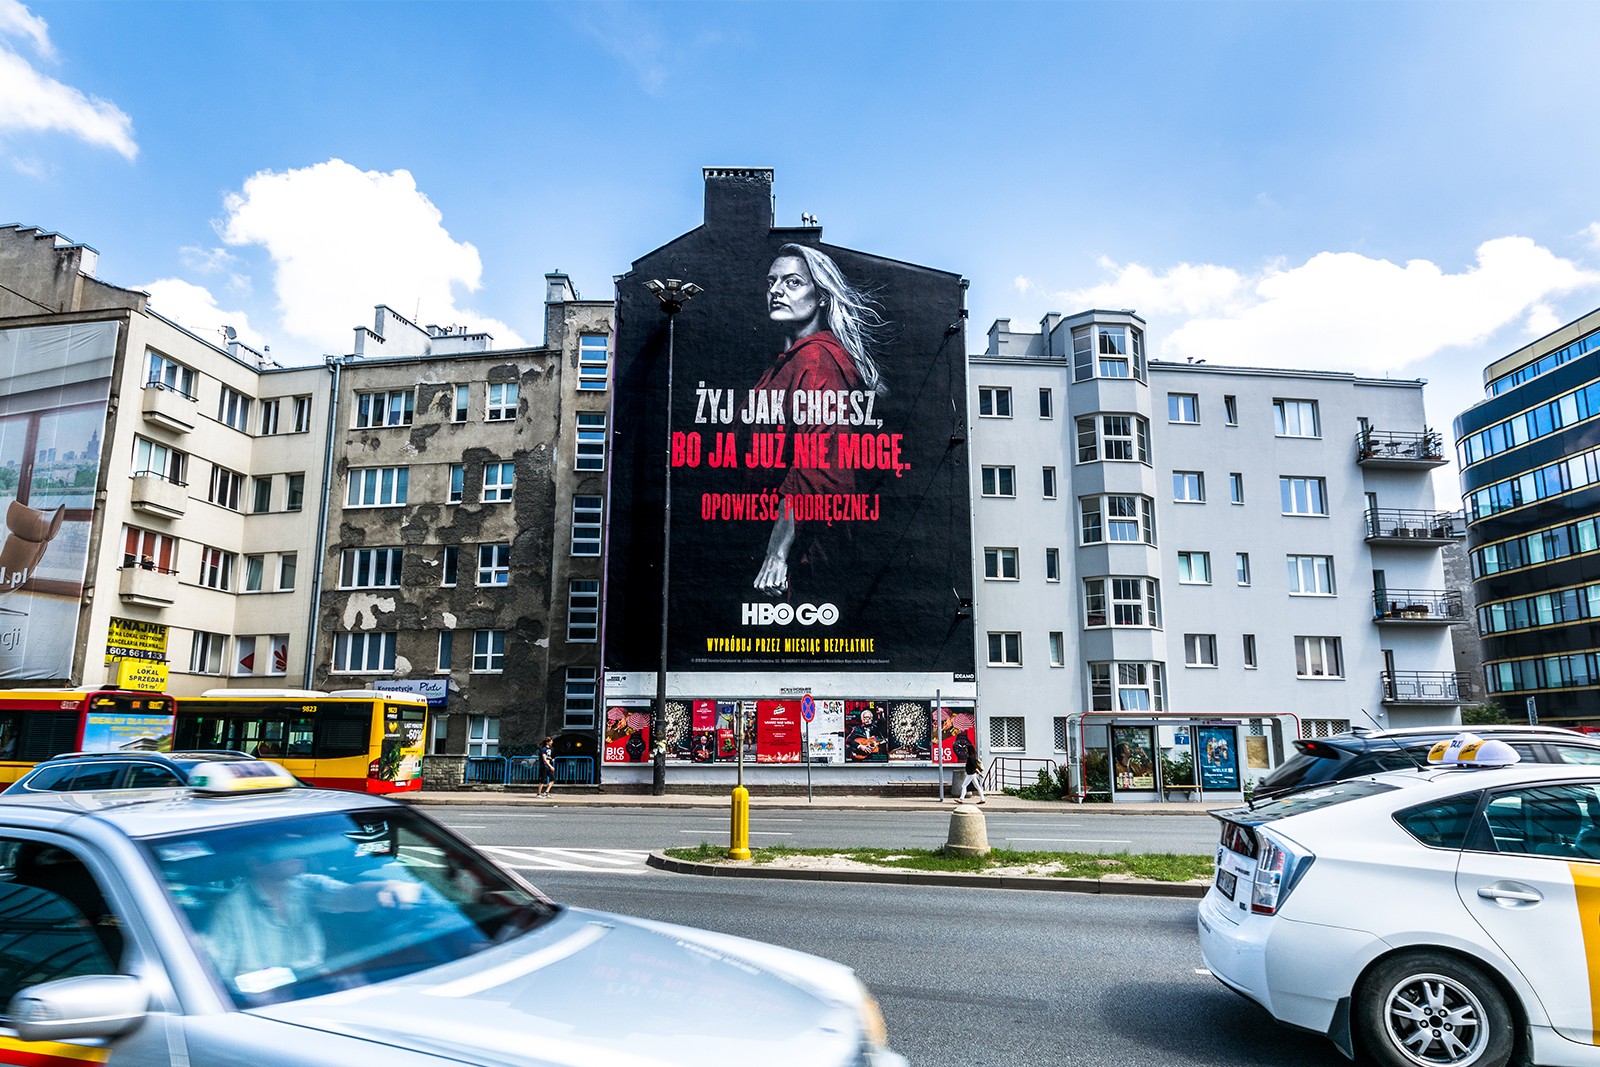 Mural advertising the series The Handmaid's Tale commissioned by HBO GO | The Handmaid's Tale | Portfolio